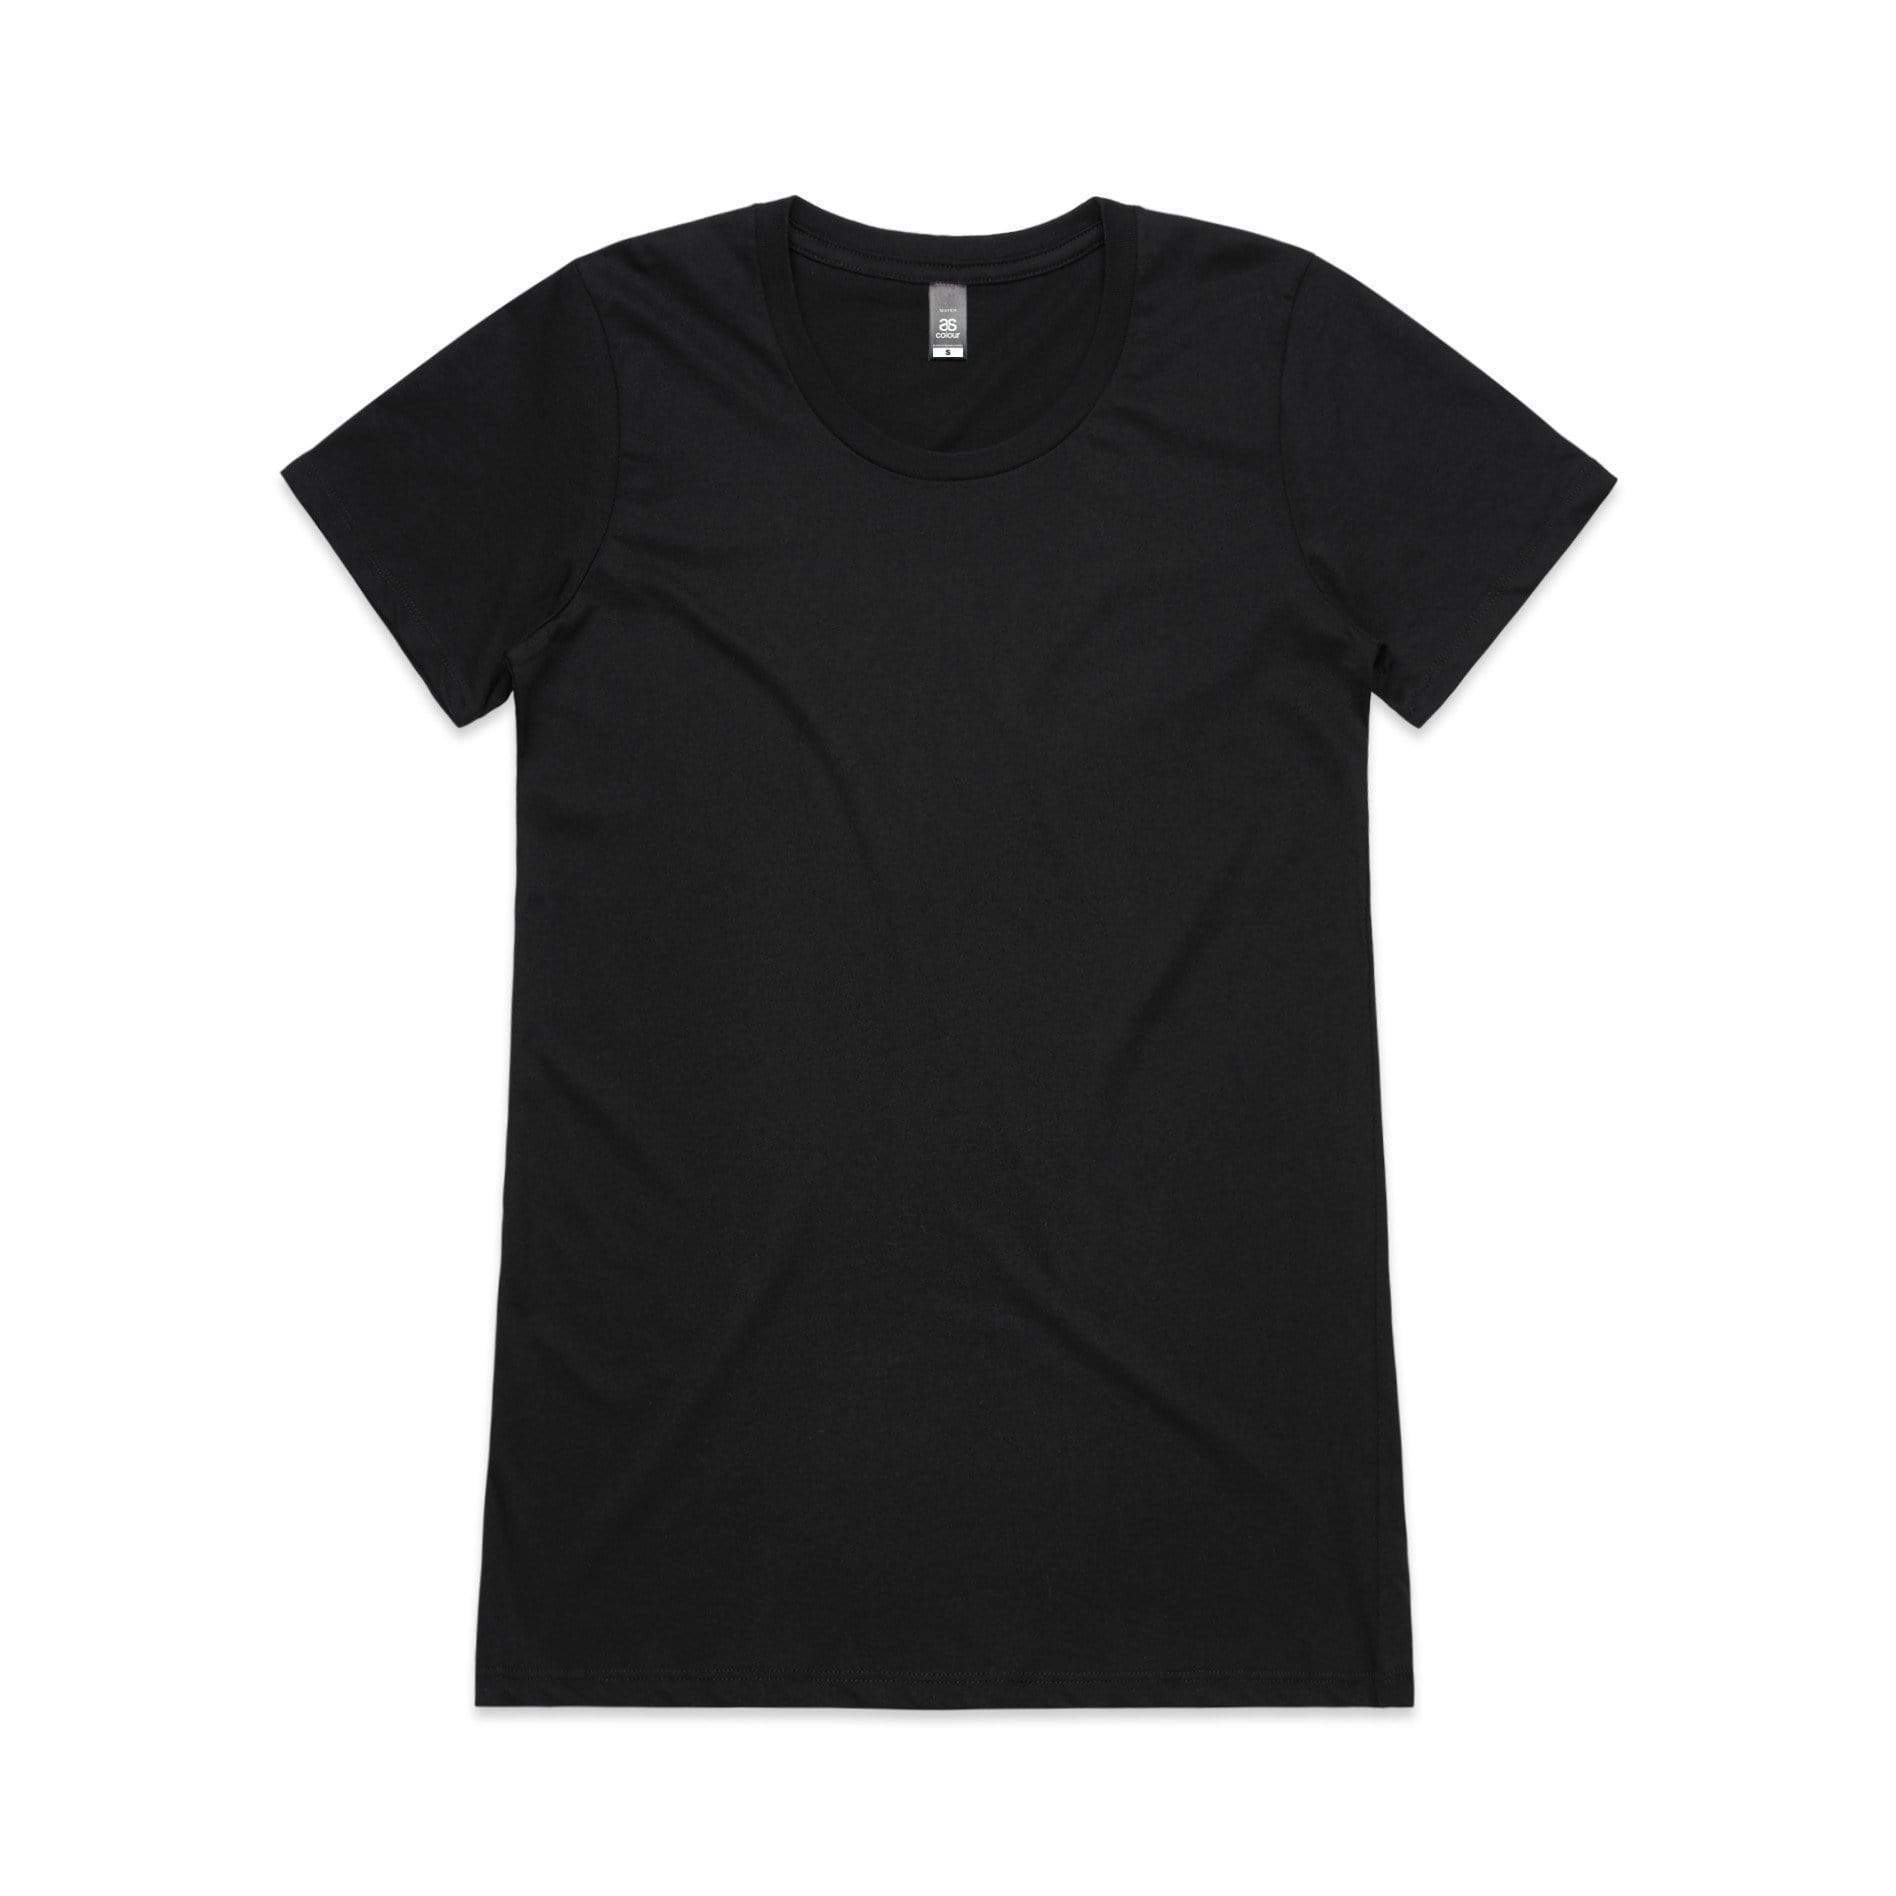 Printed As Colour Women's Wafer tee 4002 Casual Wear As Colour BLACK XSM 